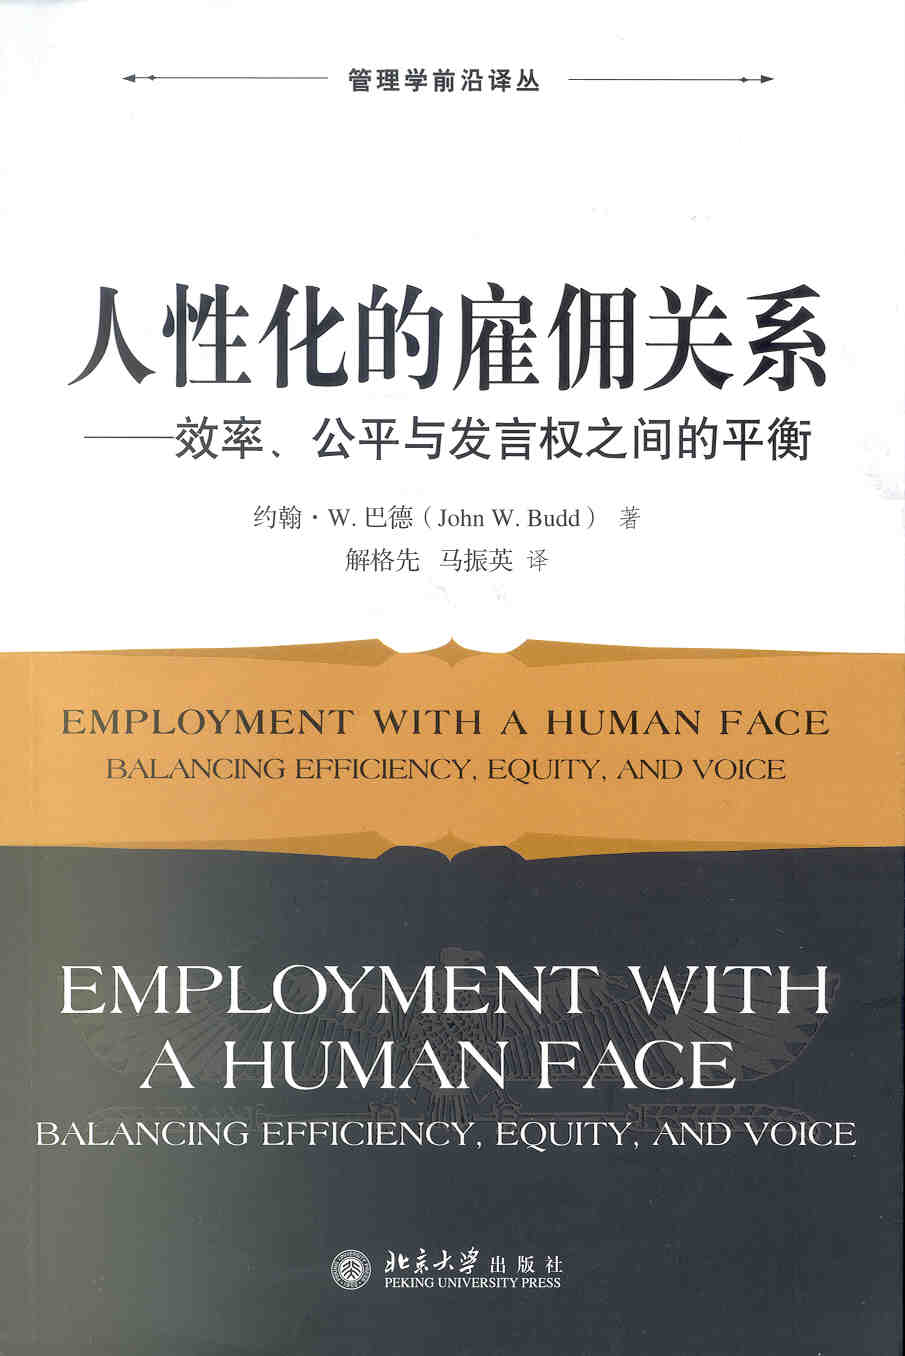 Chinese Cover